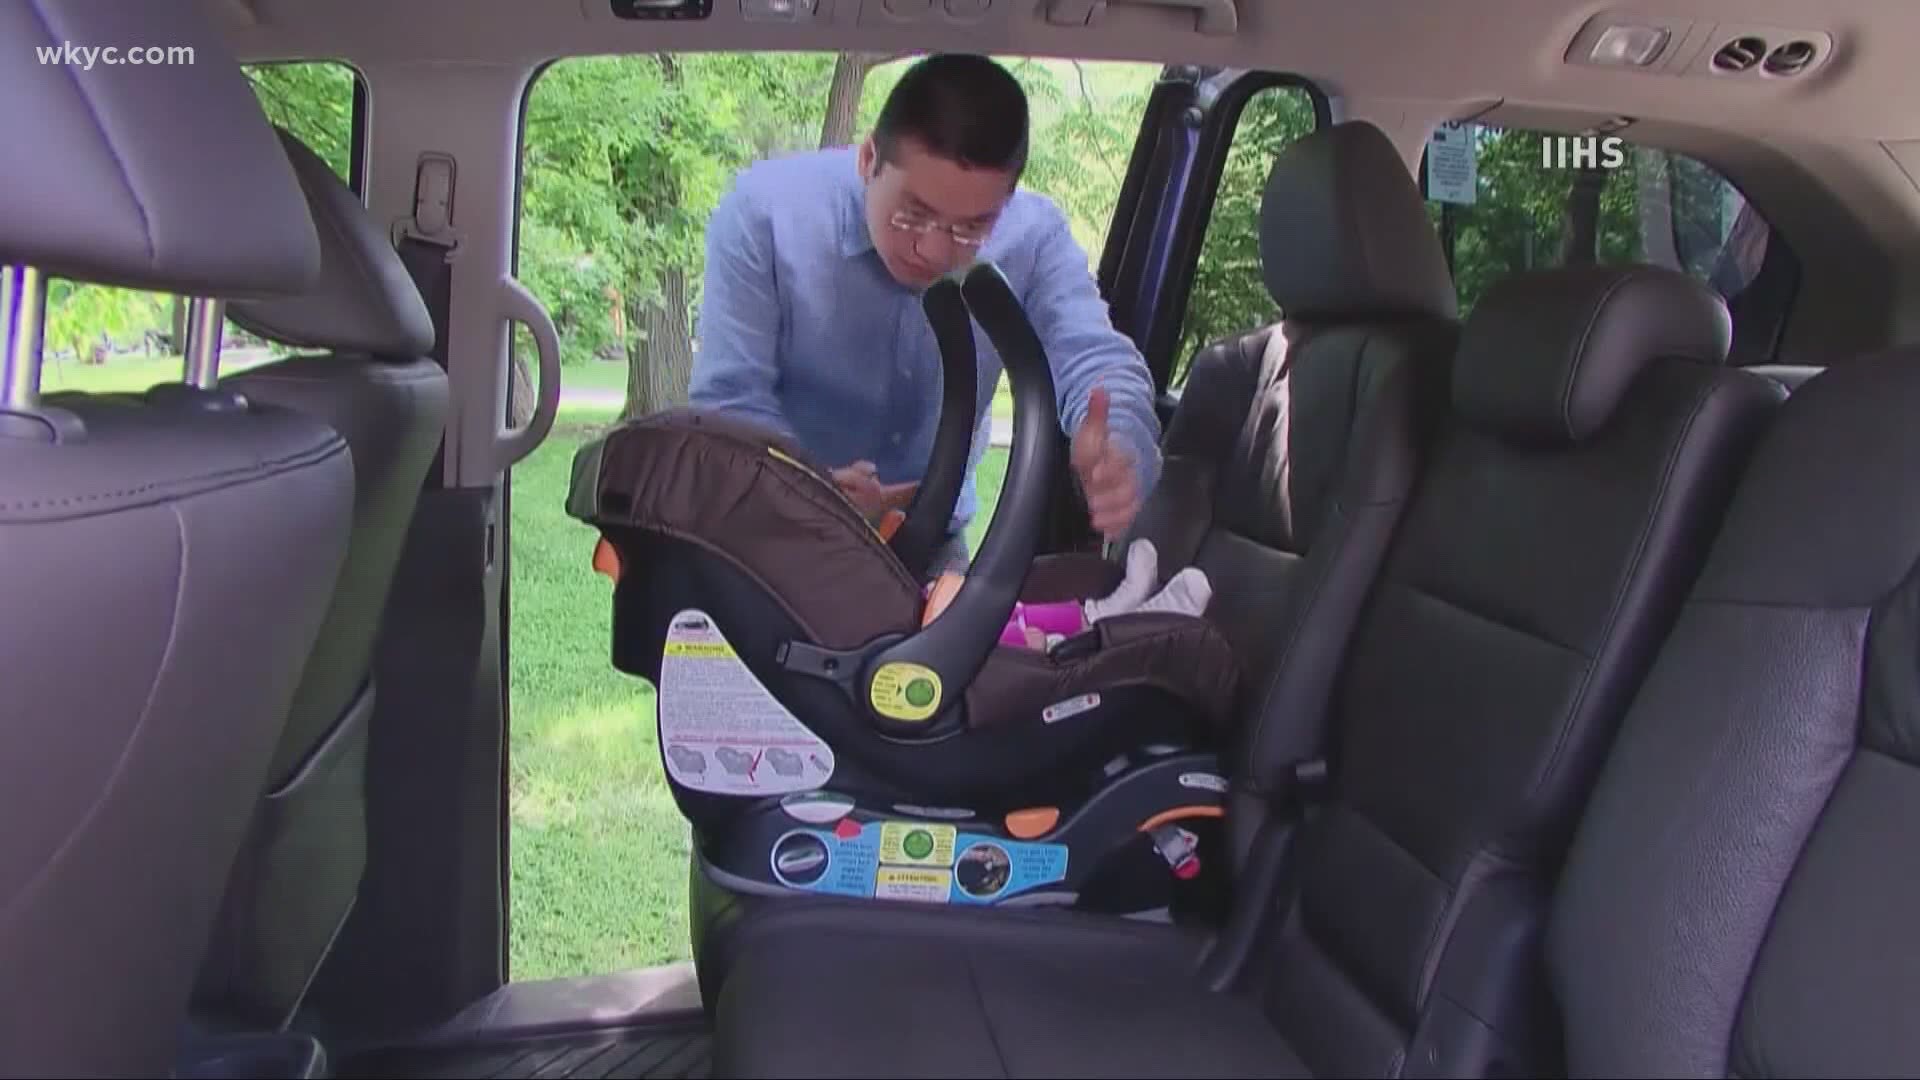 As temperatures heat up, doctors around the country are warning people to check their back seat for children. Nearly 900 children have died in hot cars since 1998.